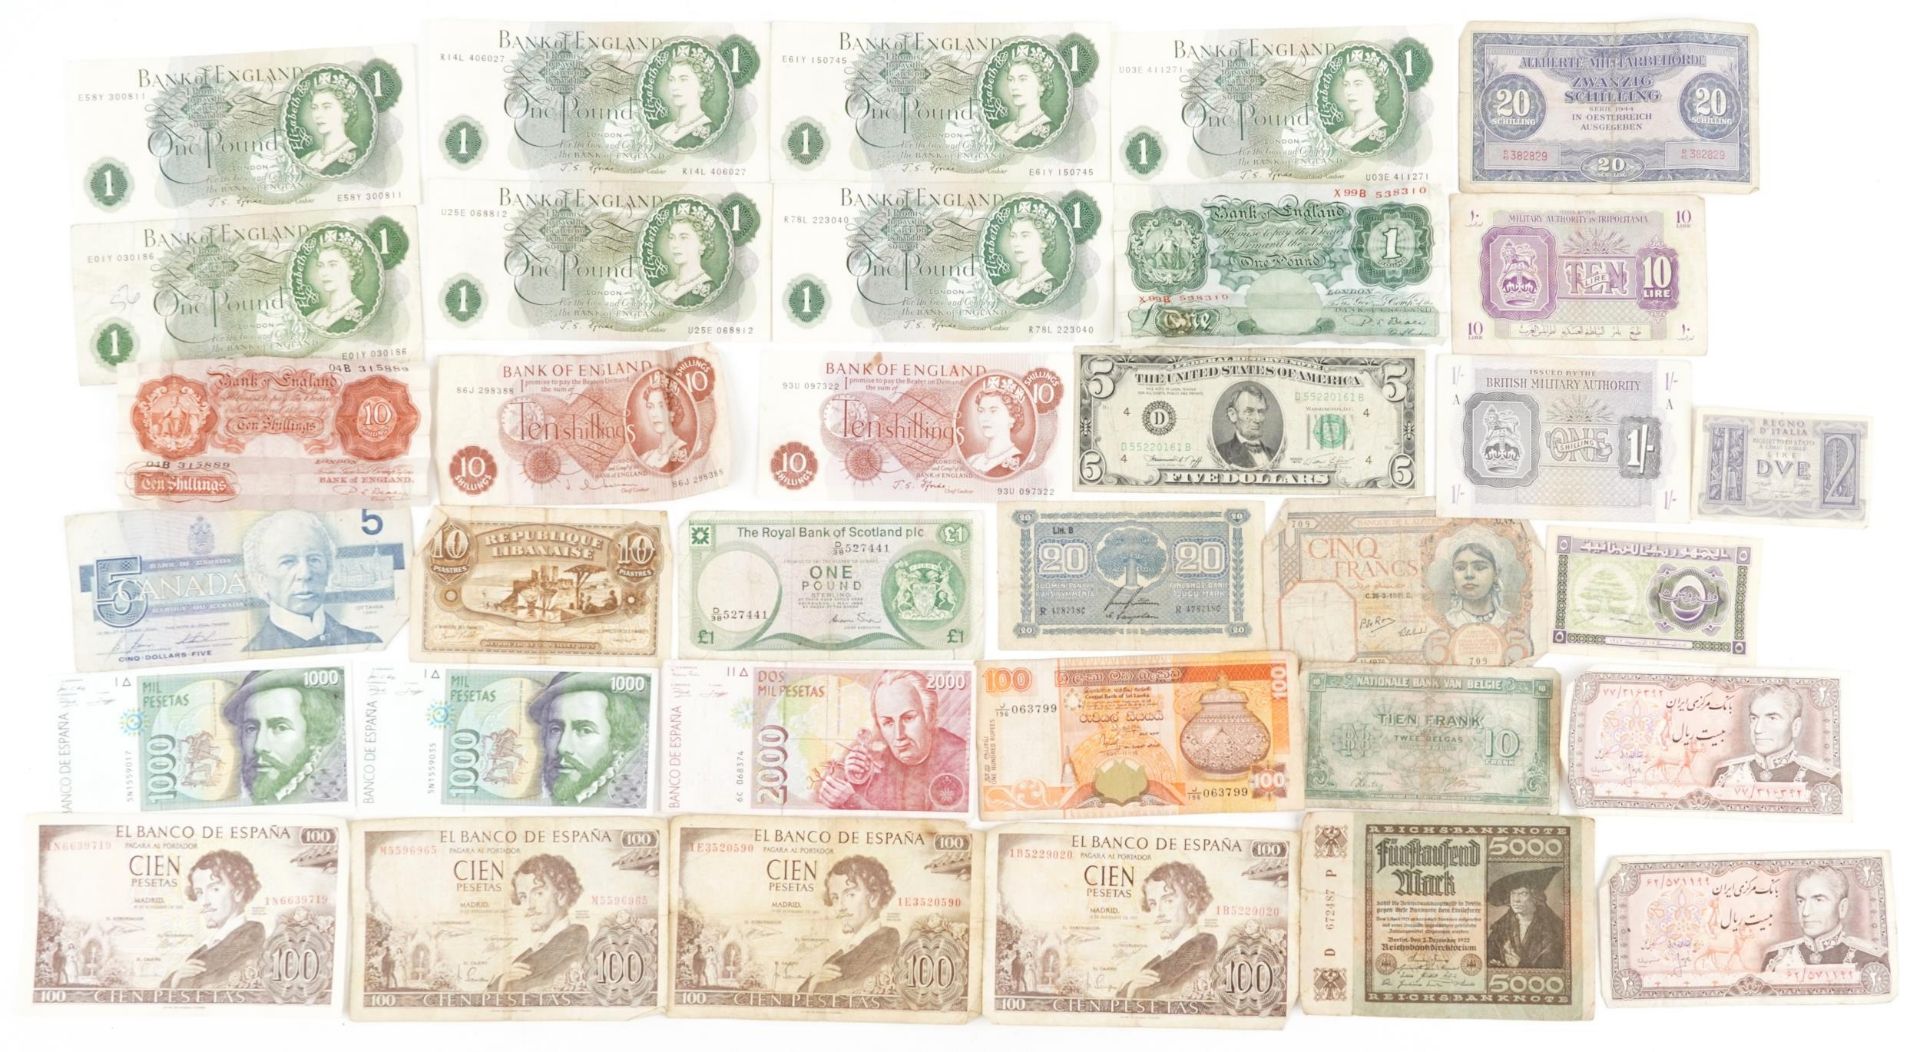 Foreign and British banknotes including British one pound banknotes, Chief Cashier J S Fforde, ten